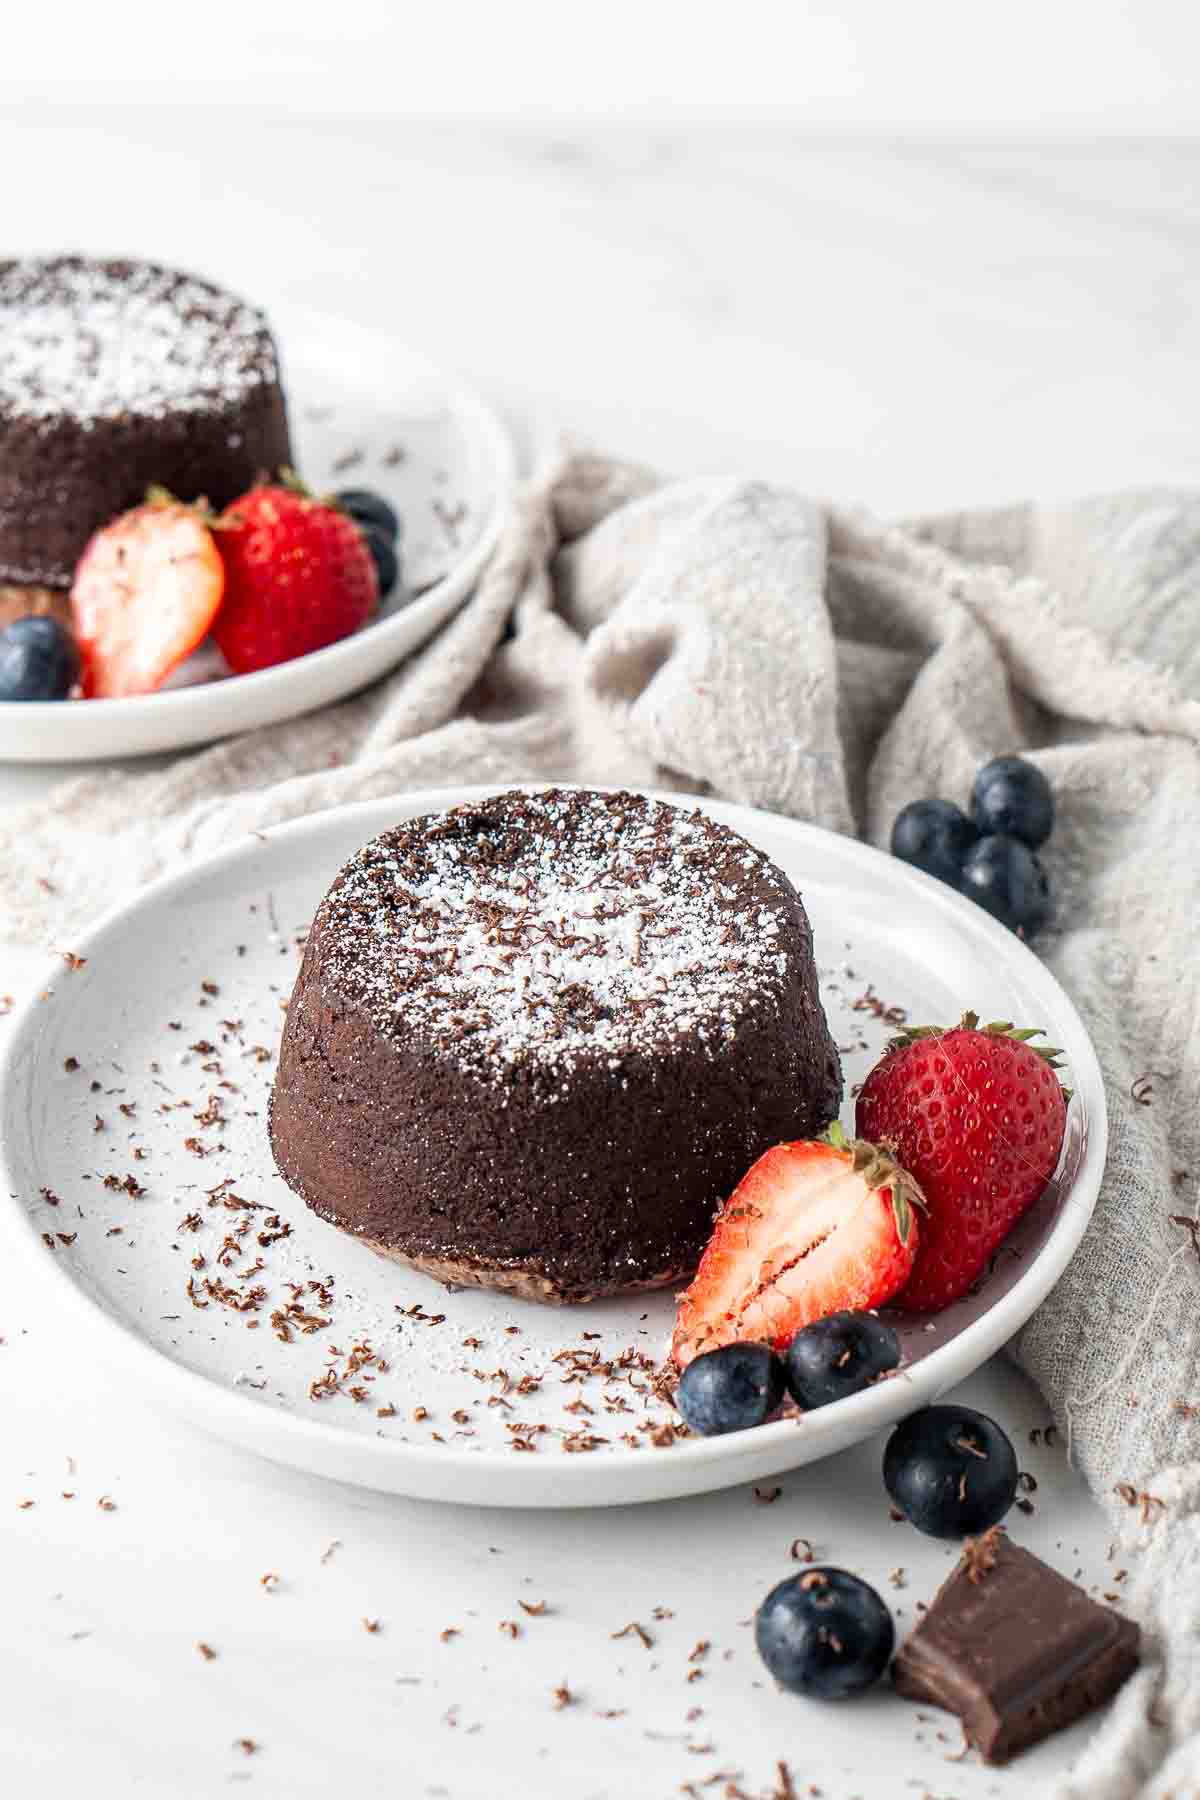 Chocolate lava cake on a white plate, dusted with icing sugar and fresh berries.